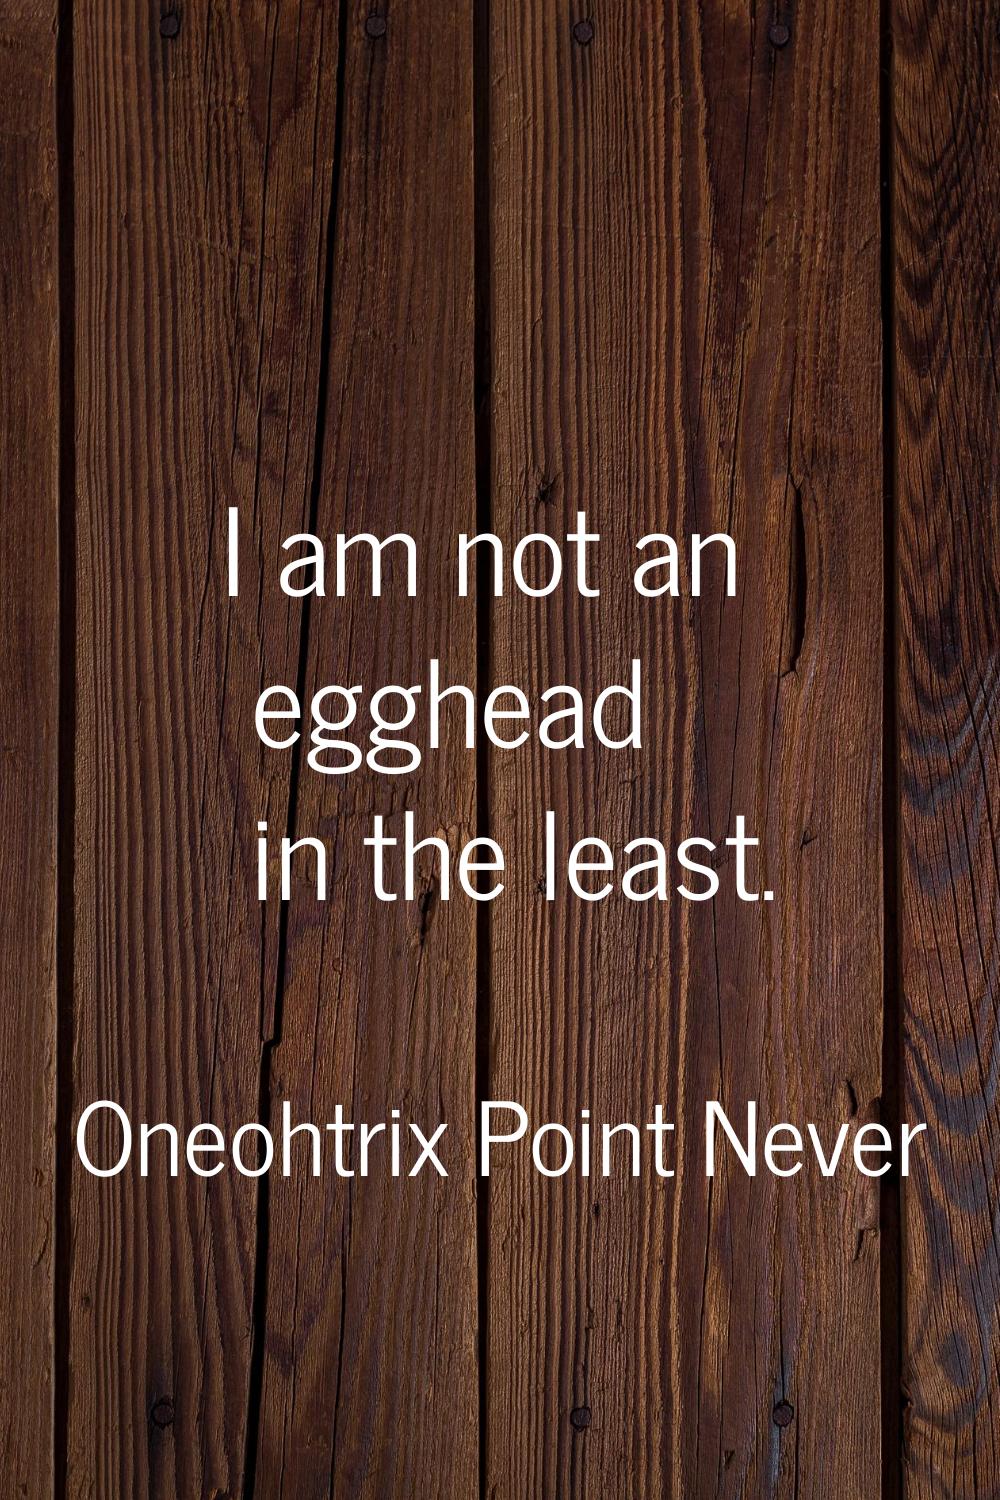 I am not an egghead in the least.